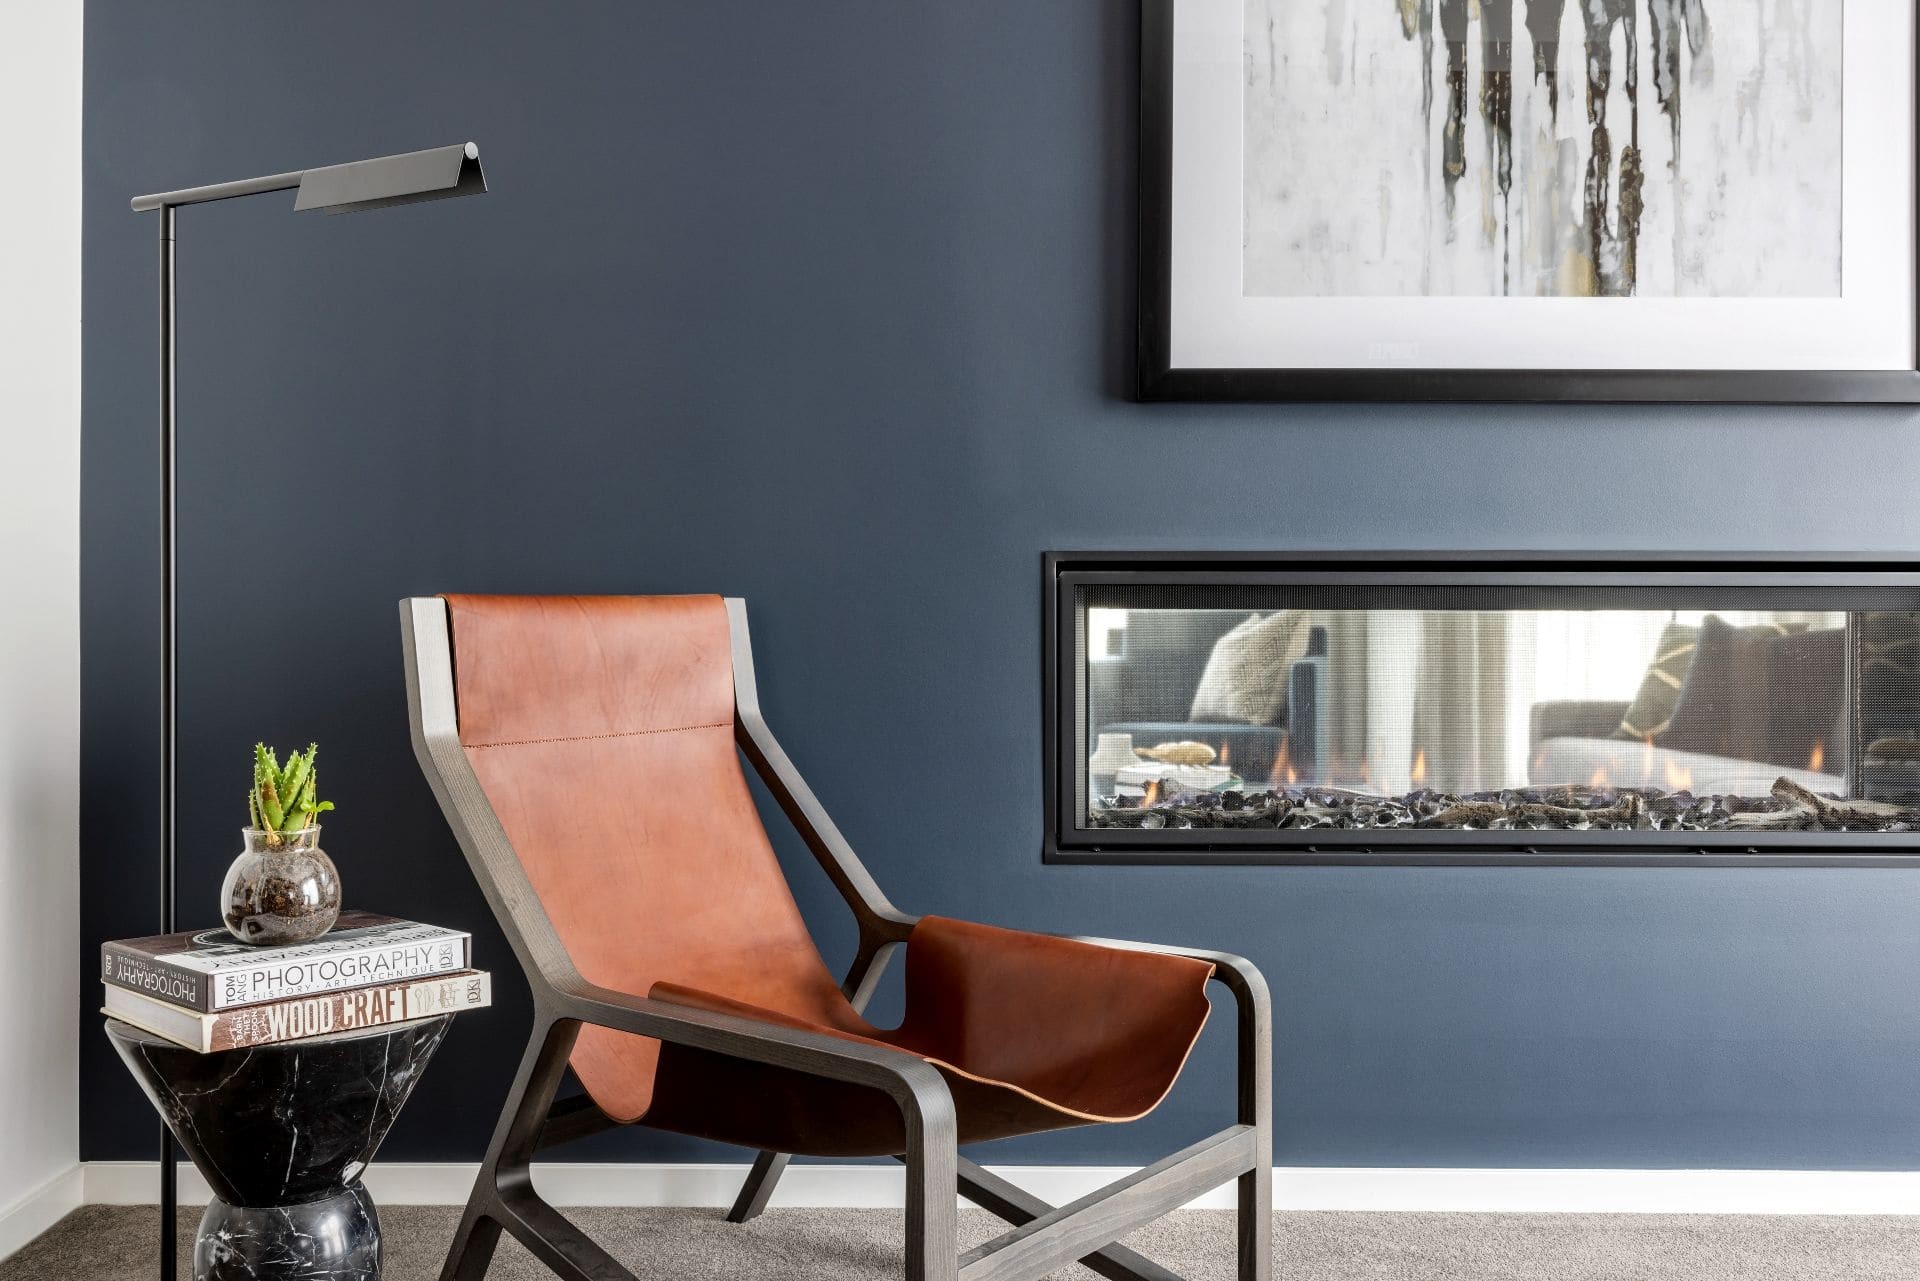 tan leather armchair in room with dark blue grey feature wall and fireplace